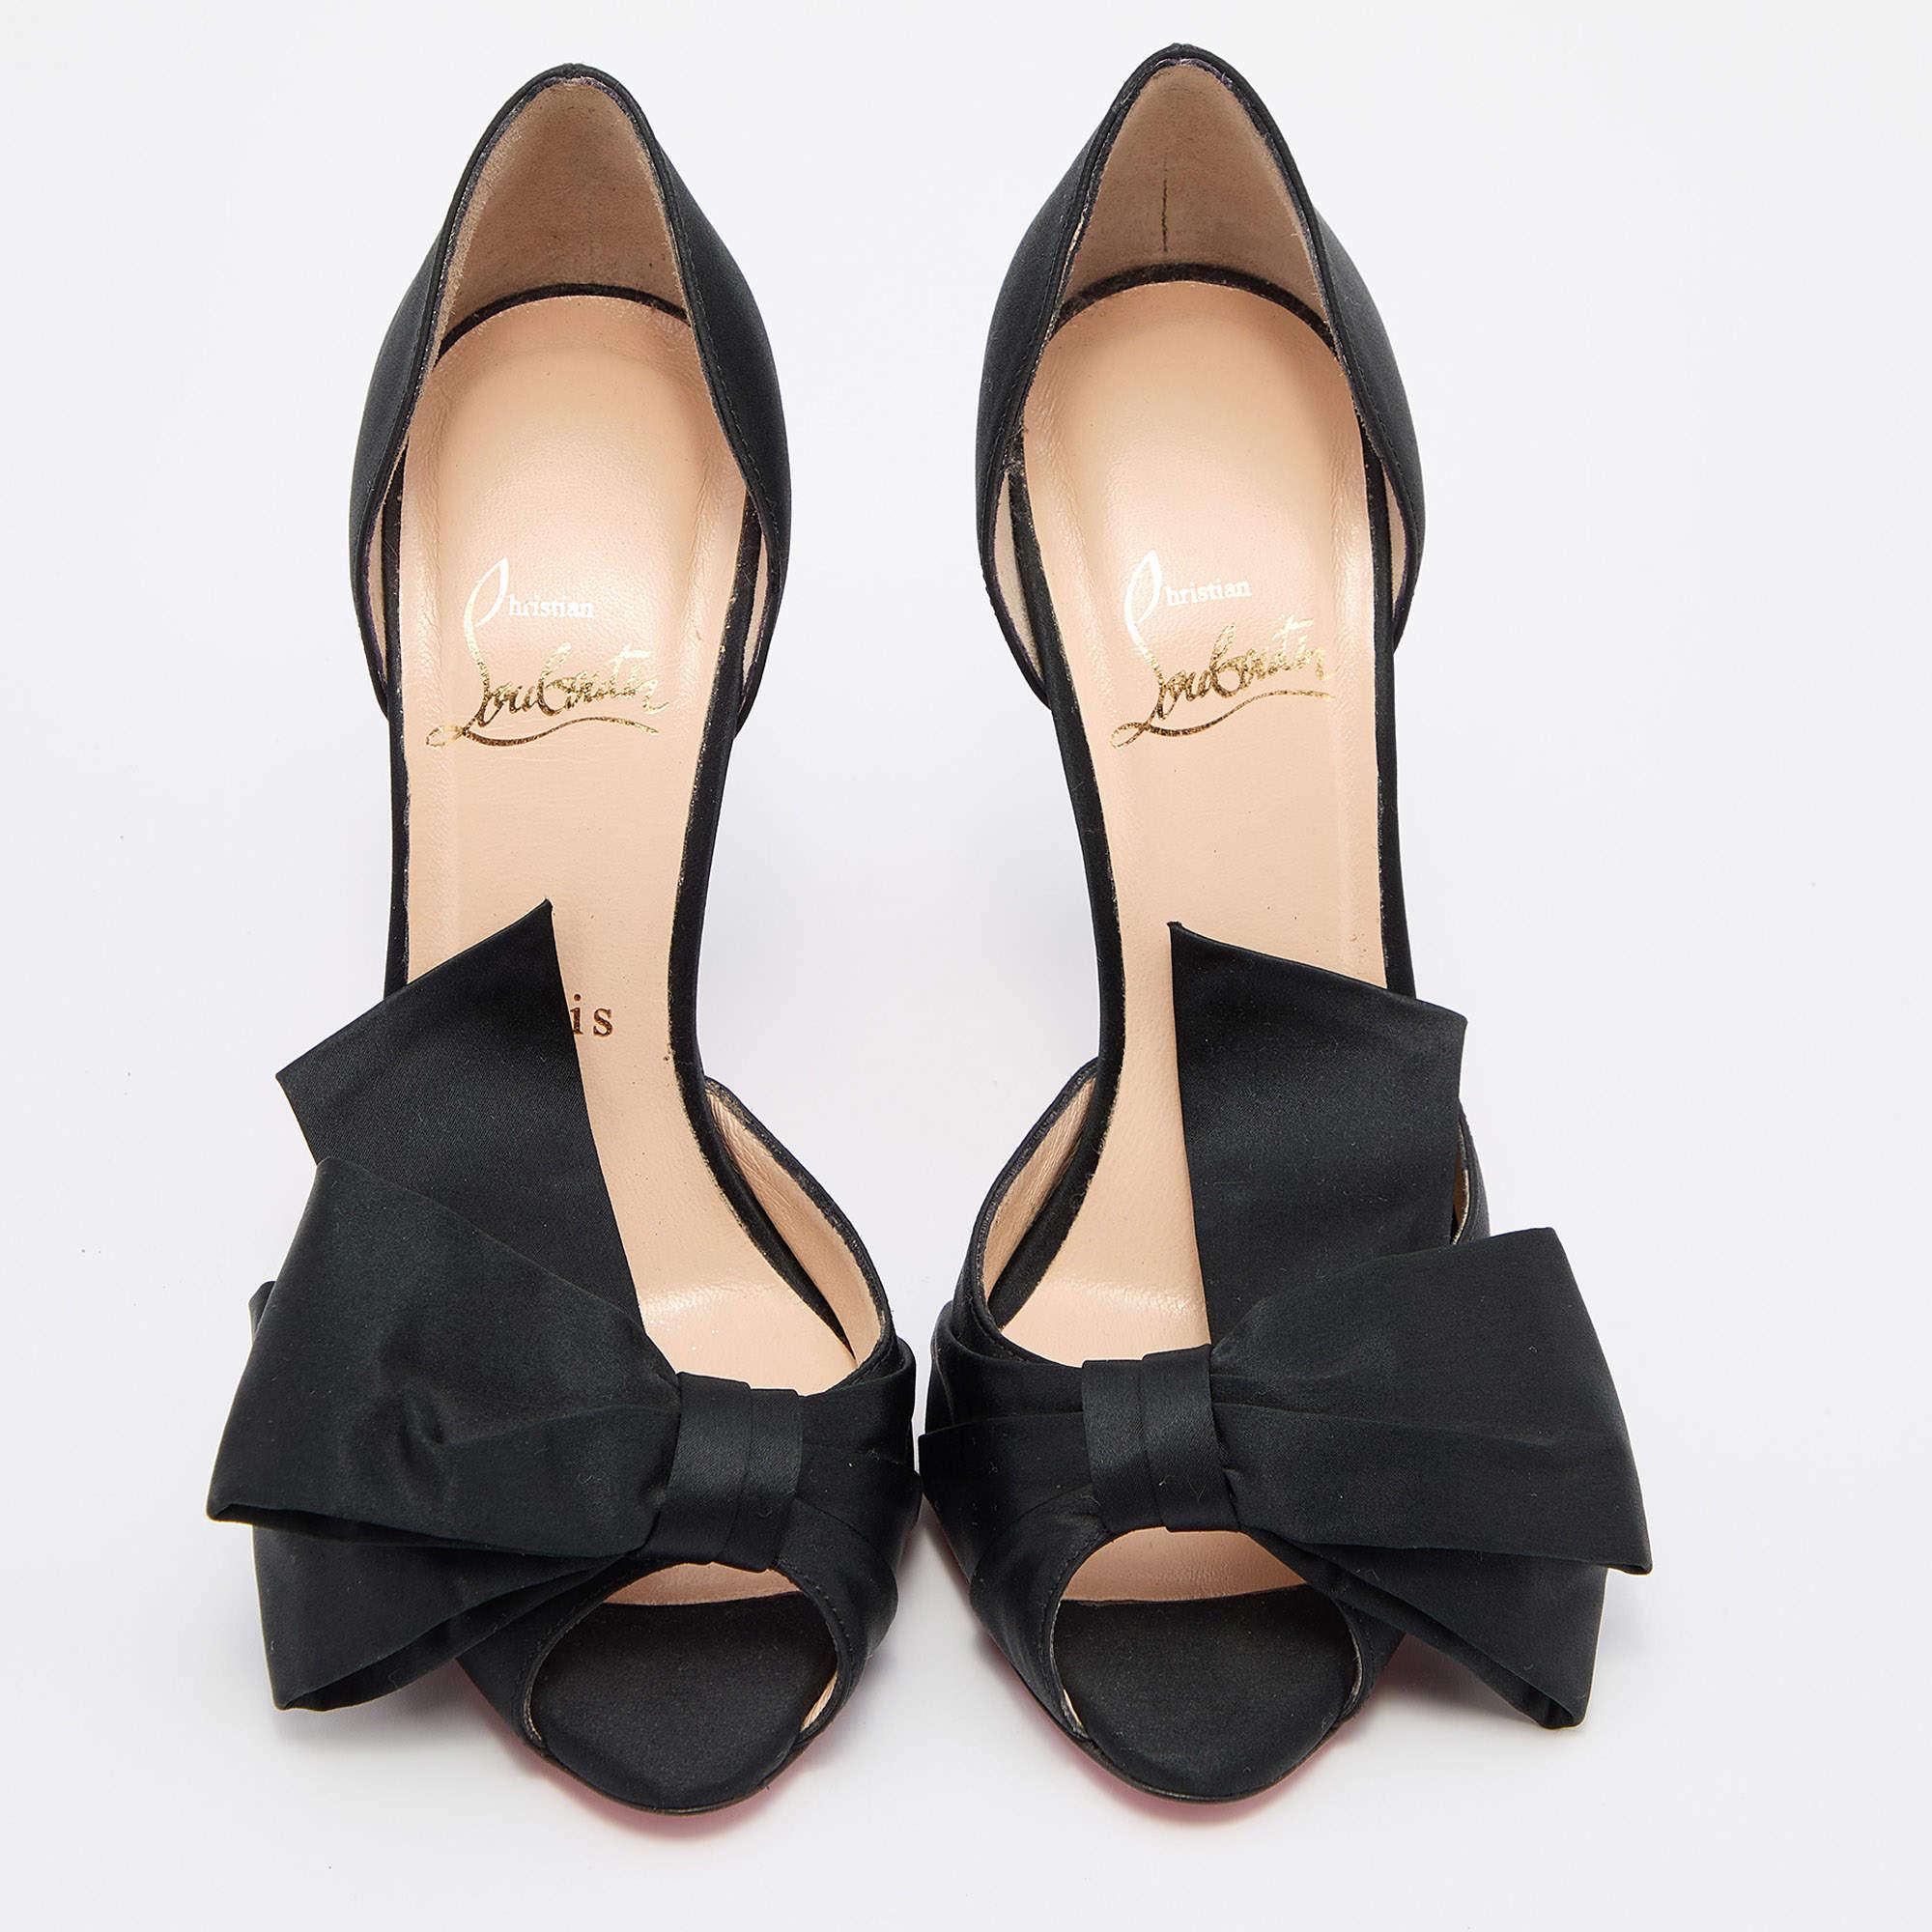 Make a chic style statement with these designer pumps. They showcase sturdy heels and durable soles, perfect for your fashionable outings!

Includes: Branded Dustbag

